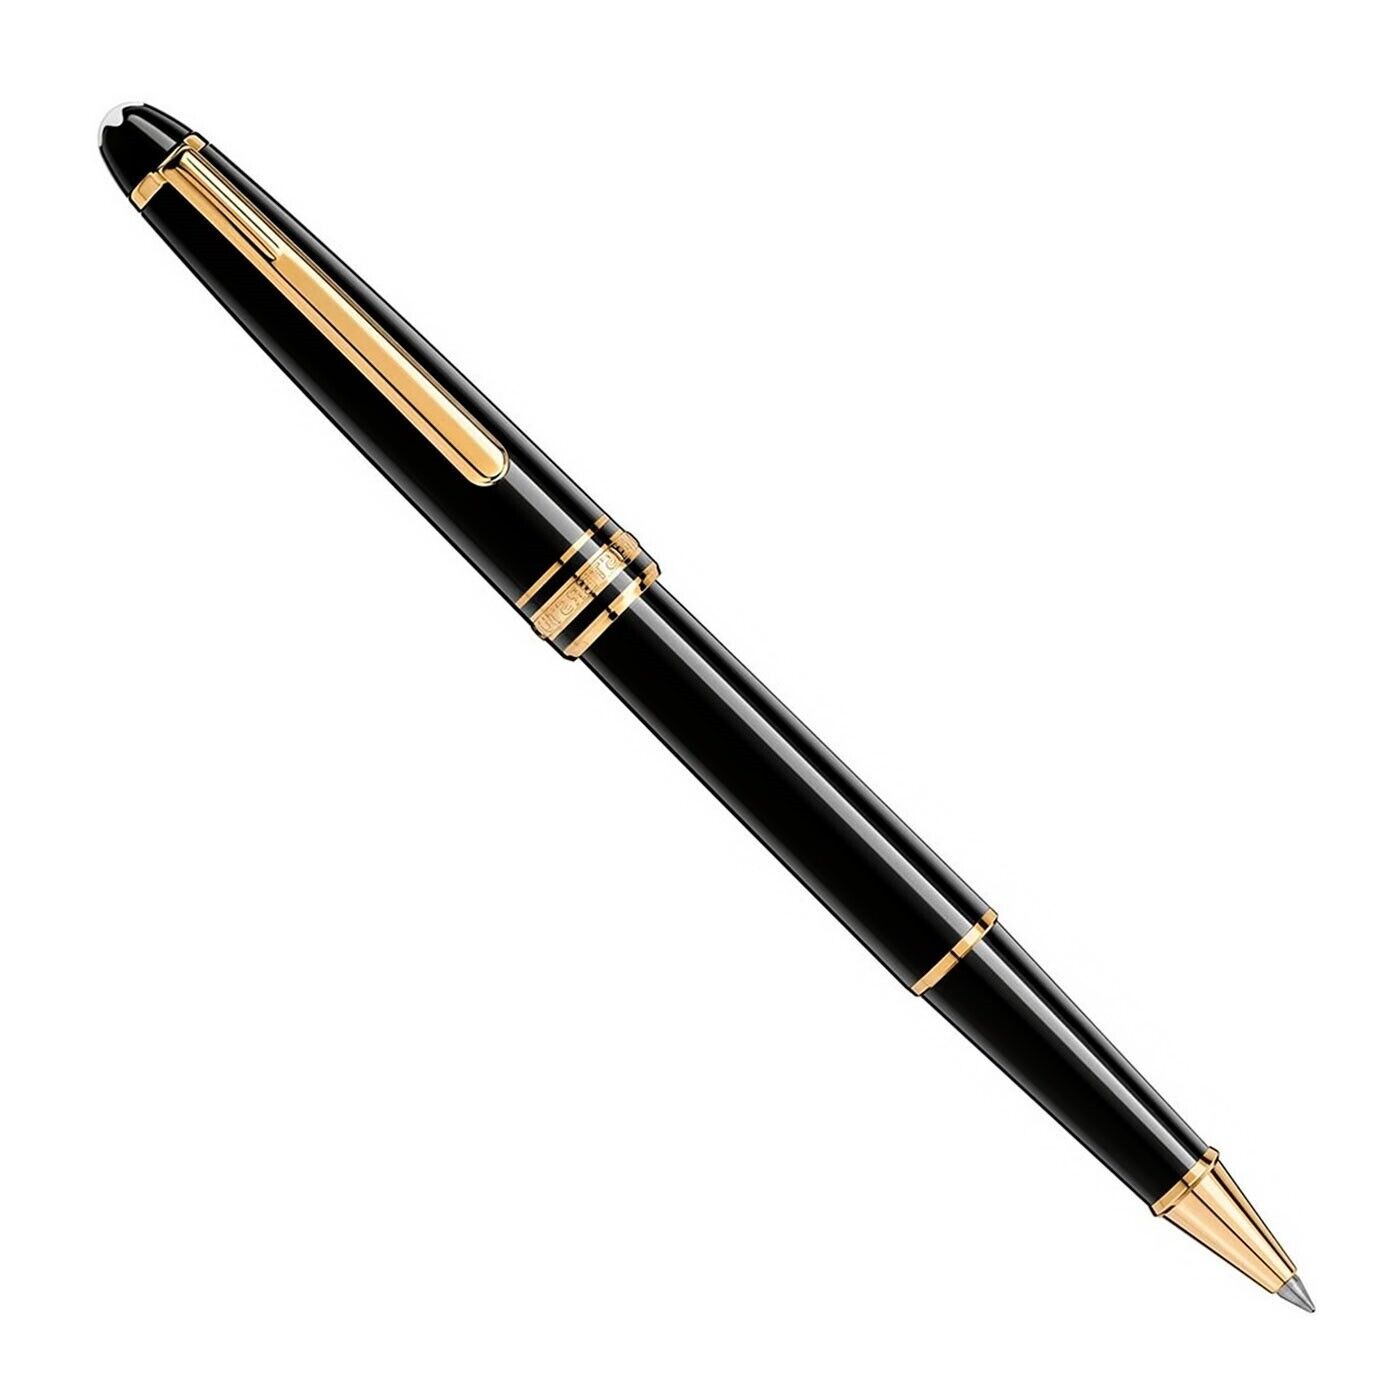 NEW MONTBLANC MEISTERSTÜCK  GOLD-COATED ROLLERBALL PEN upto 20% off